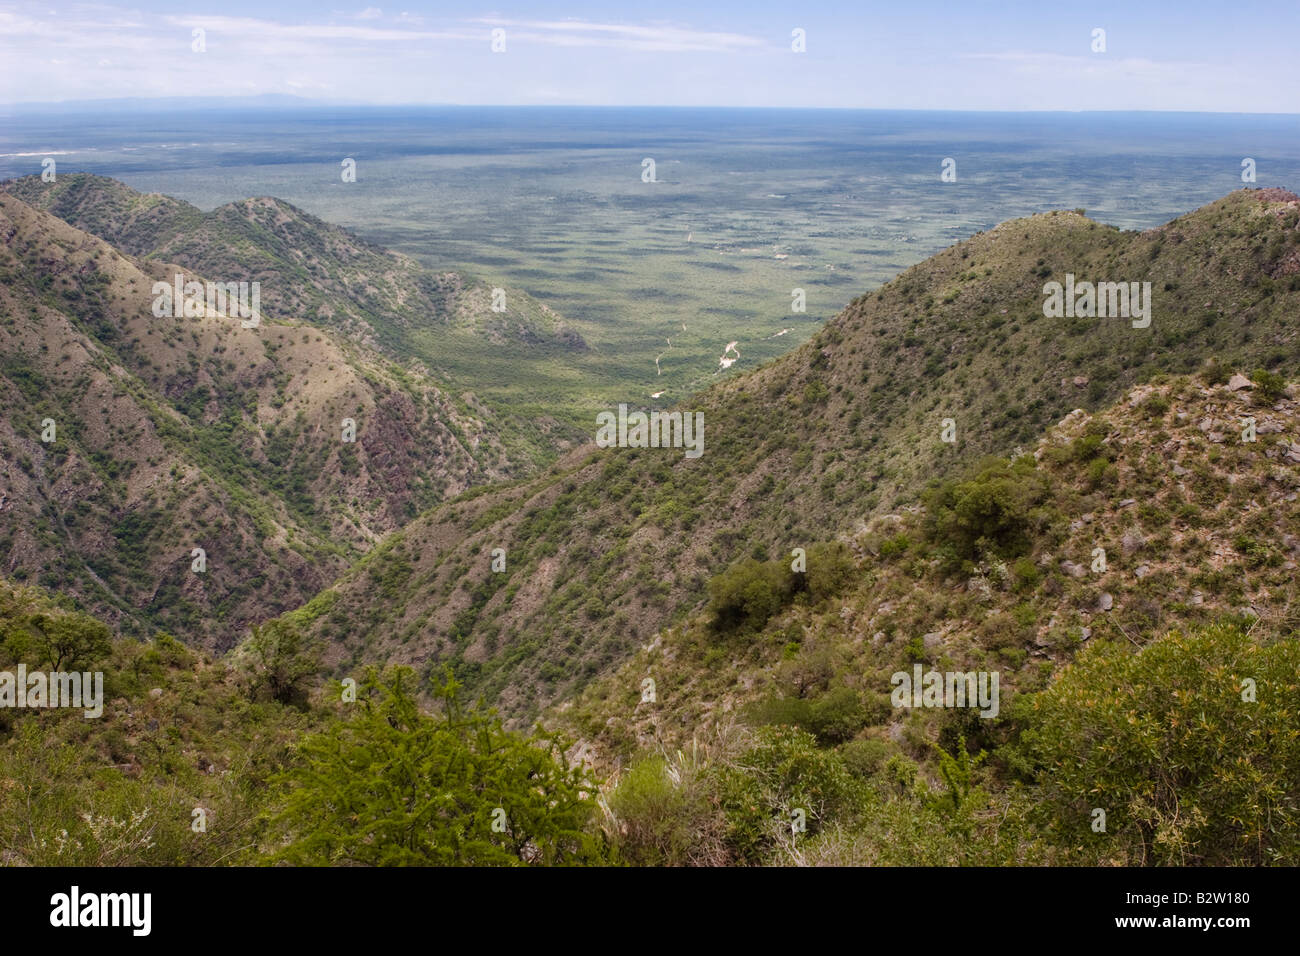 View from Los Tuneles (the tunnels) between the Sierras in Cordoba, Argentina. Stock Photo